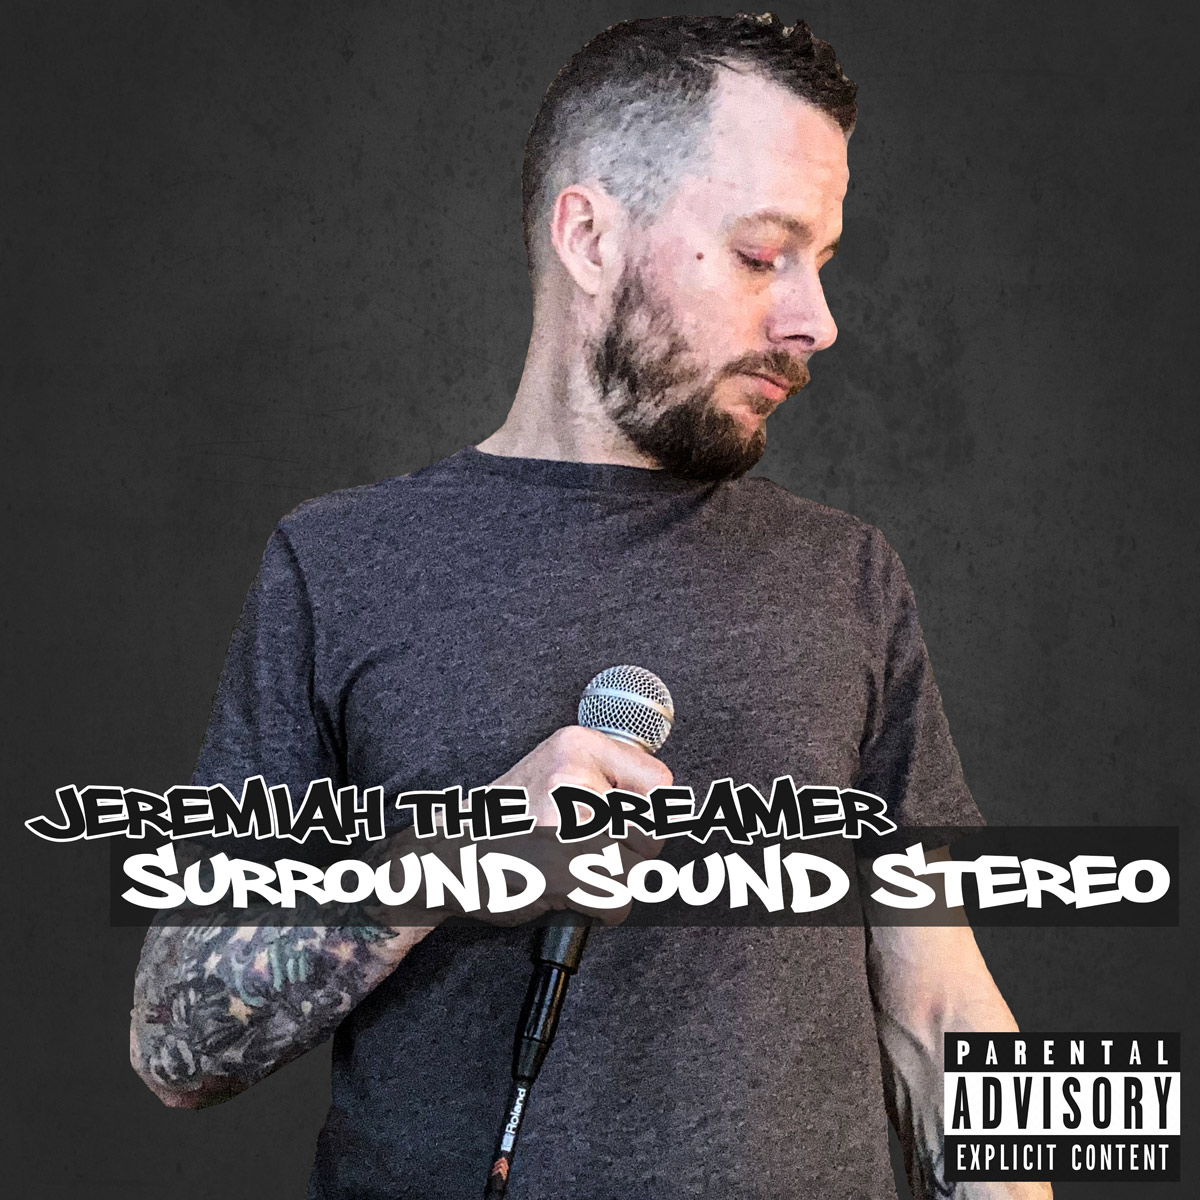 Surround Sound Stereo by Jeremiah the Dreamer